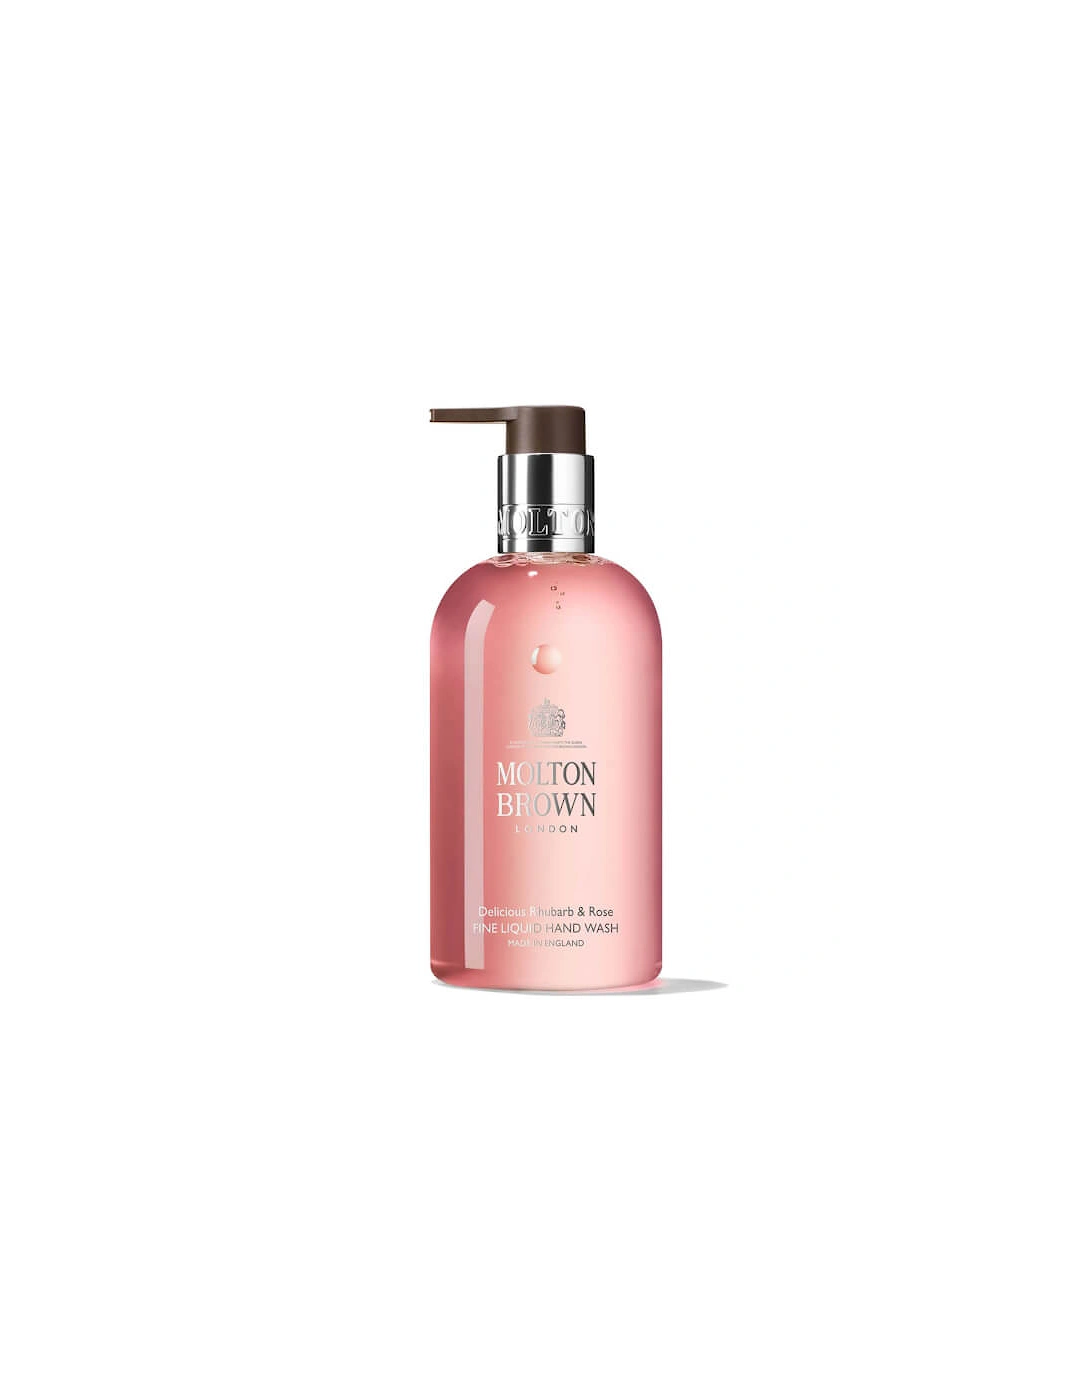 Delicious Rhubarb and Rose Fine Liquid Hand Wash (300ml) - - Delicious Rhubarb and Rose Fine Liquid Hand Wash (300ml) - Janice - Delicious Rhubarb and Rose Fine Liquid Hand Wash (300ml) - Jane Ann frying pan - Delicious Rhubarb and Rose Fine Liquid Hand Wash (300ml) - Janeannfryingpan, 2 of 1